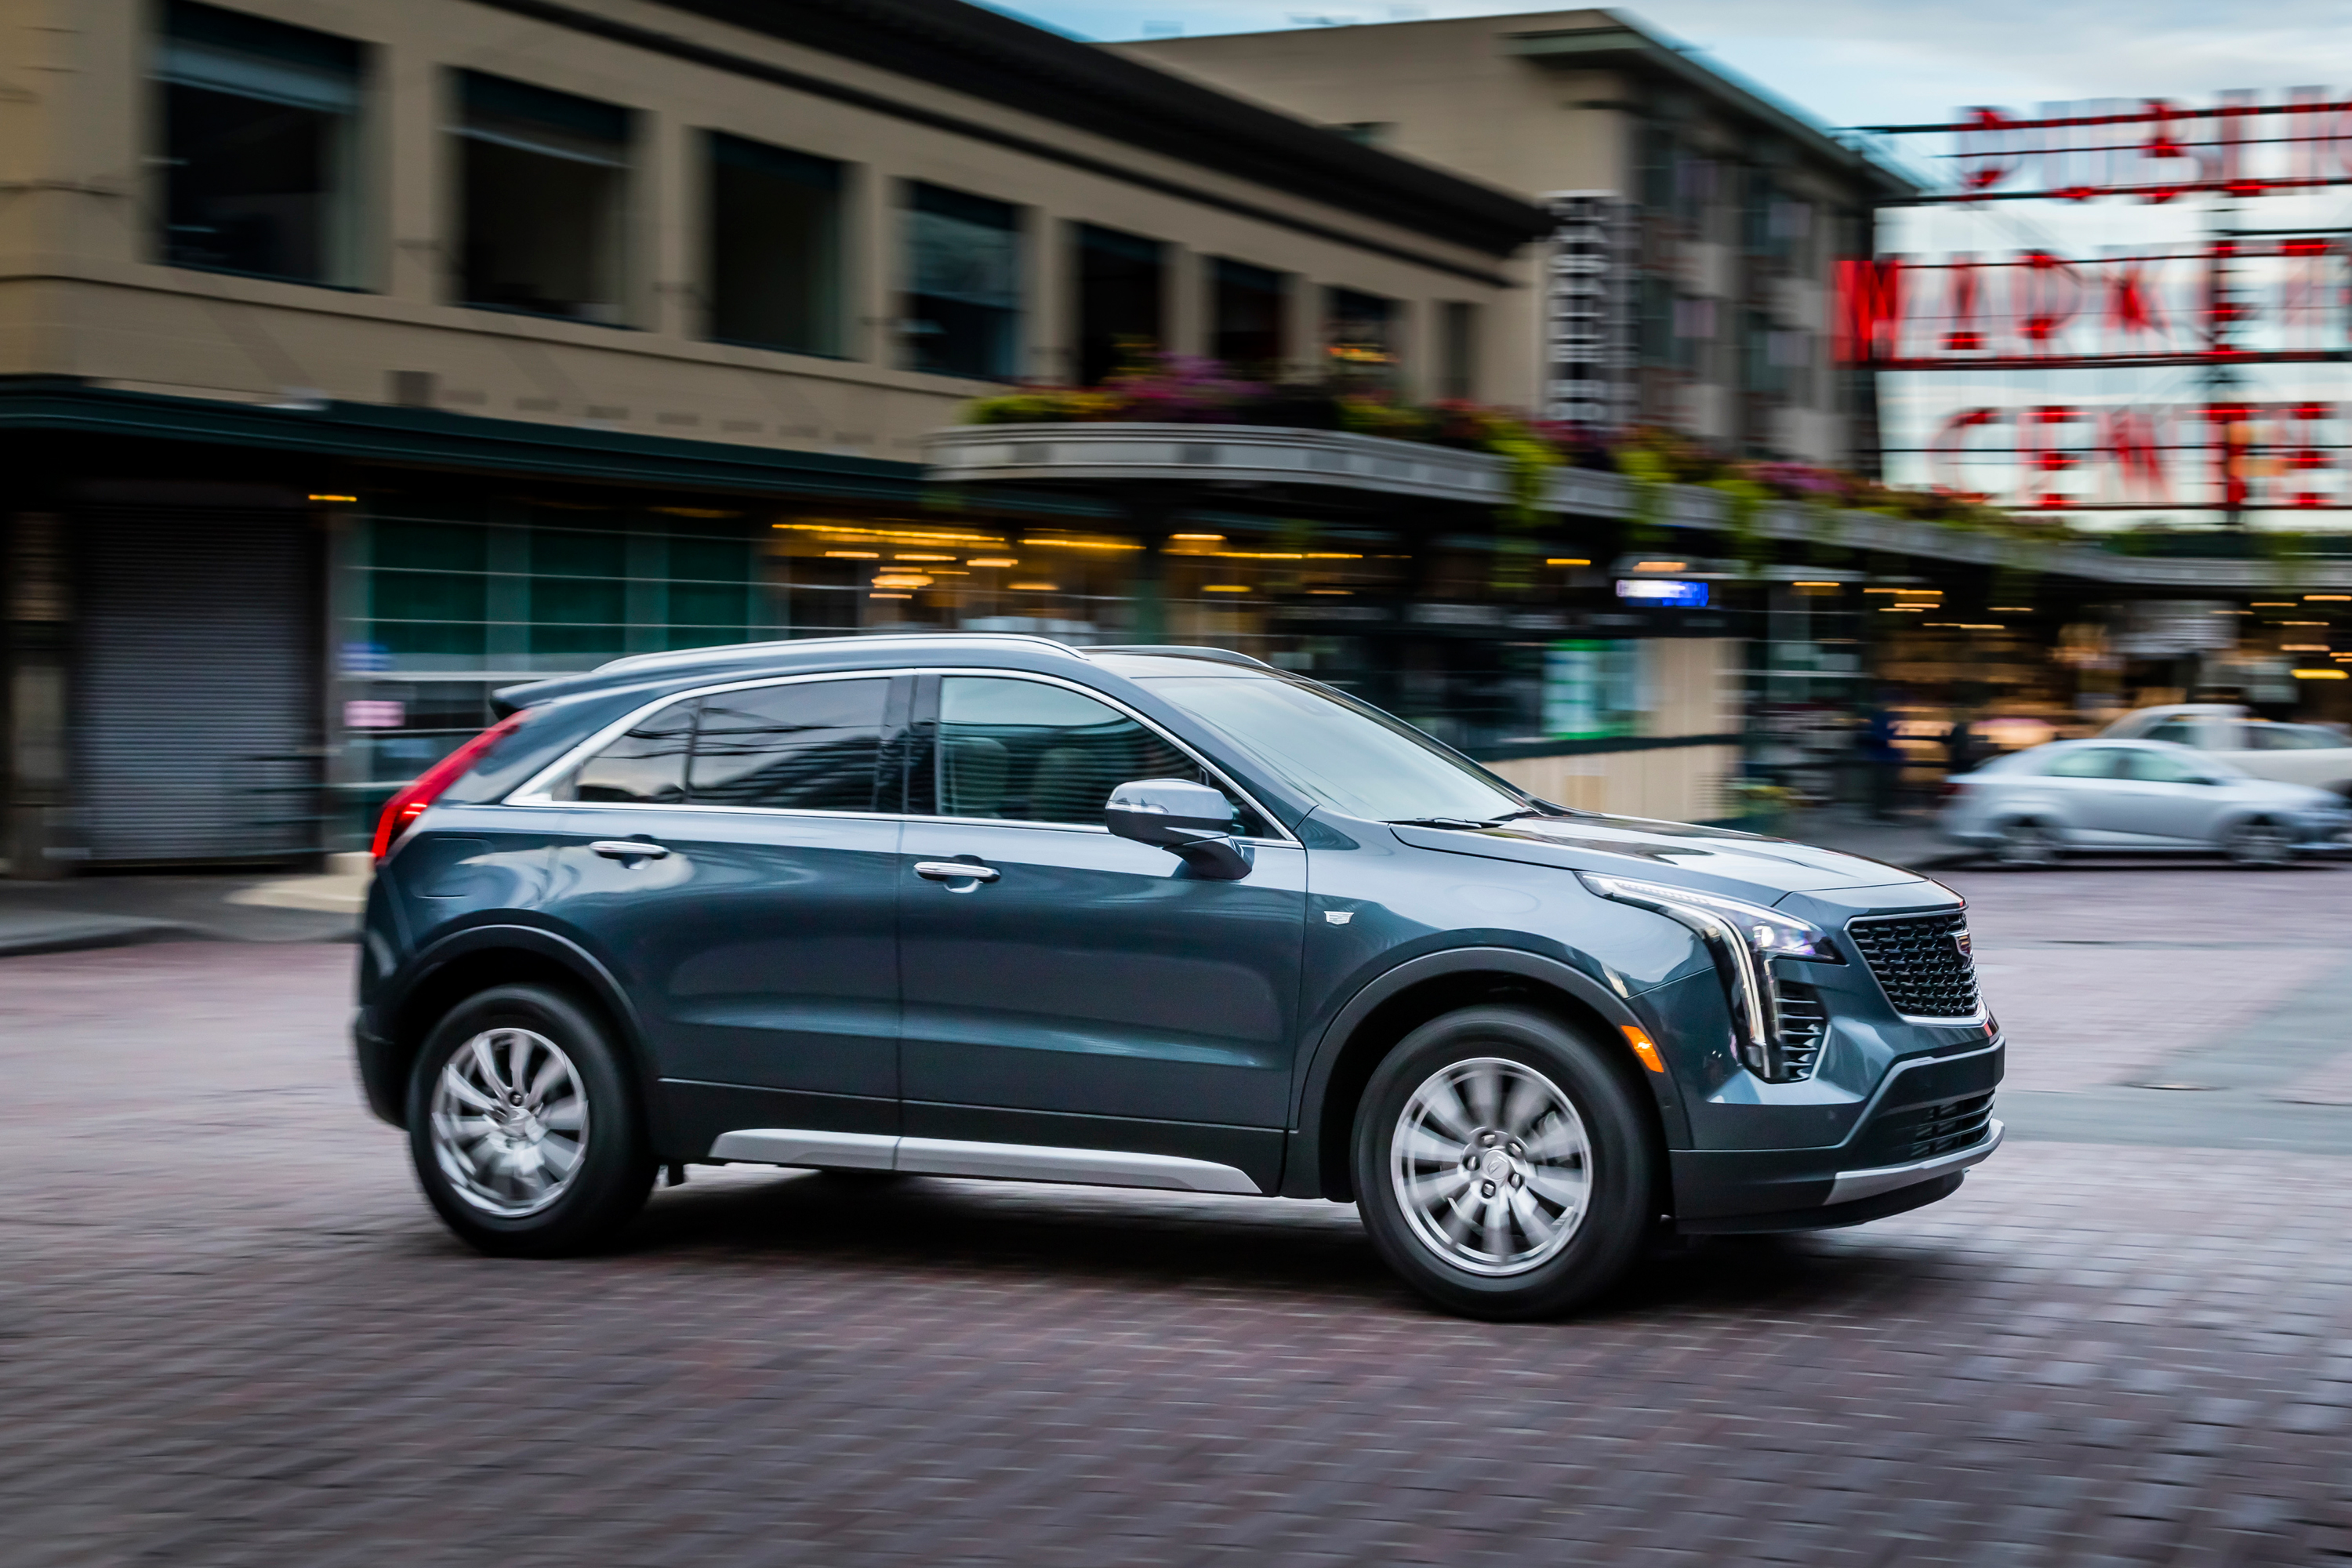 2022 Cadillac XT4 Review: Fielding an Entry